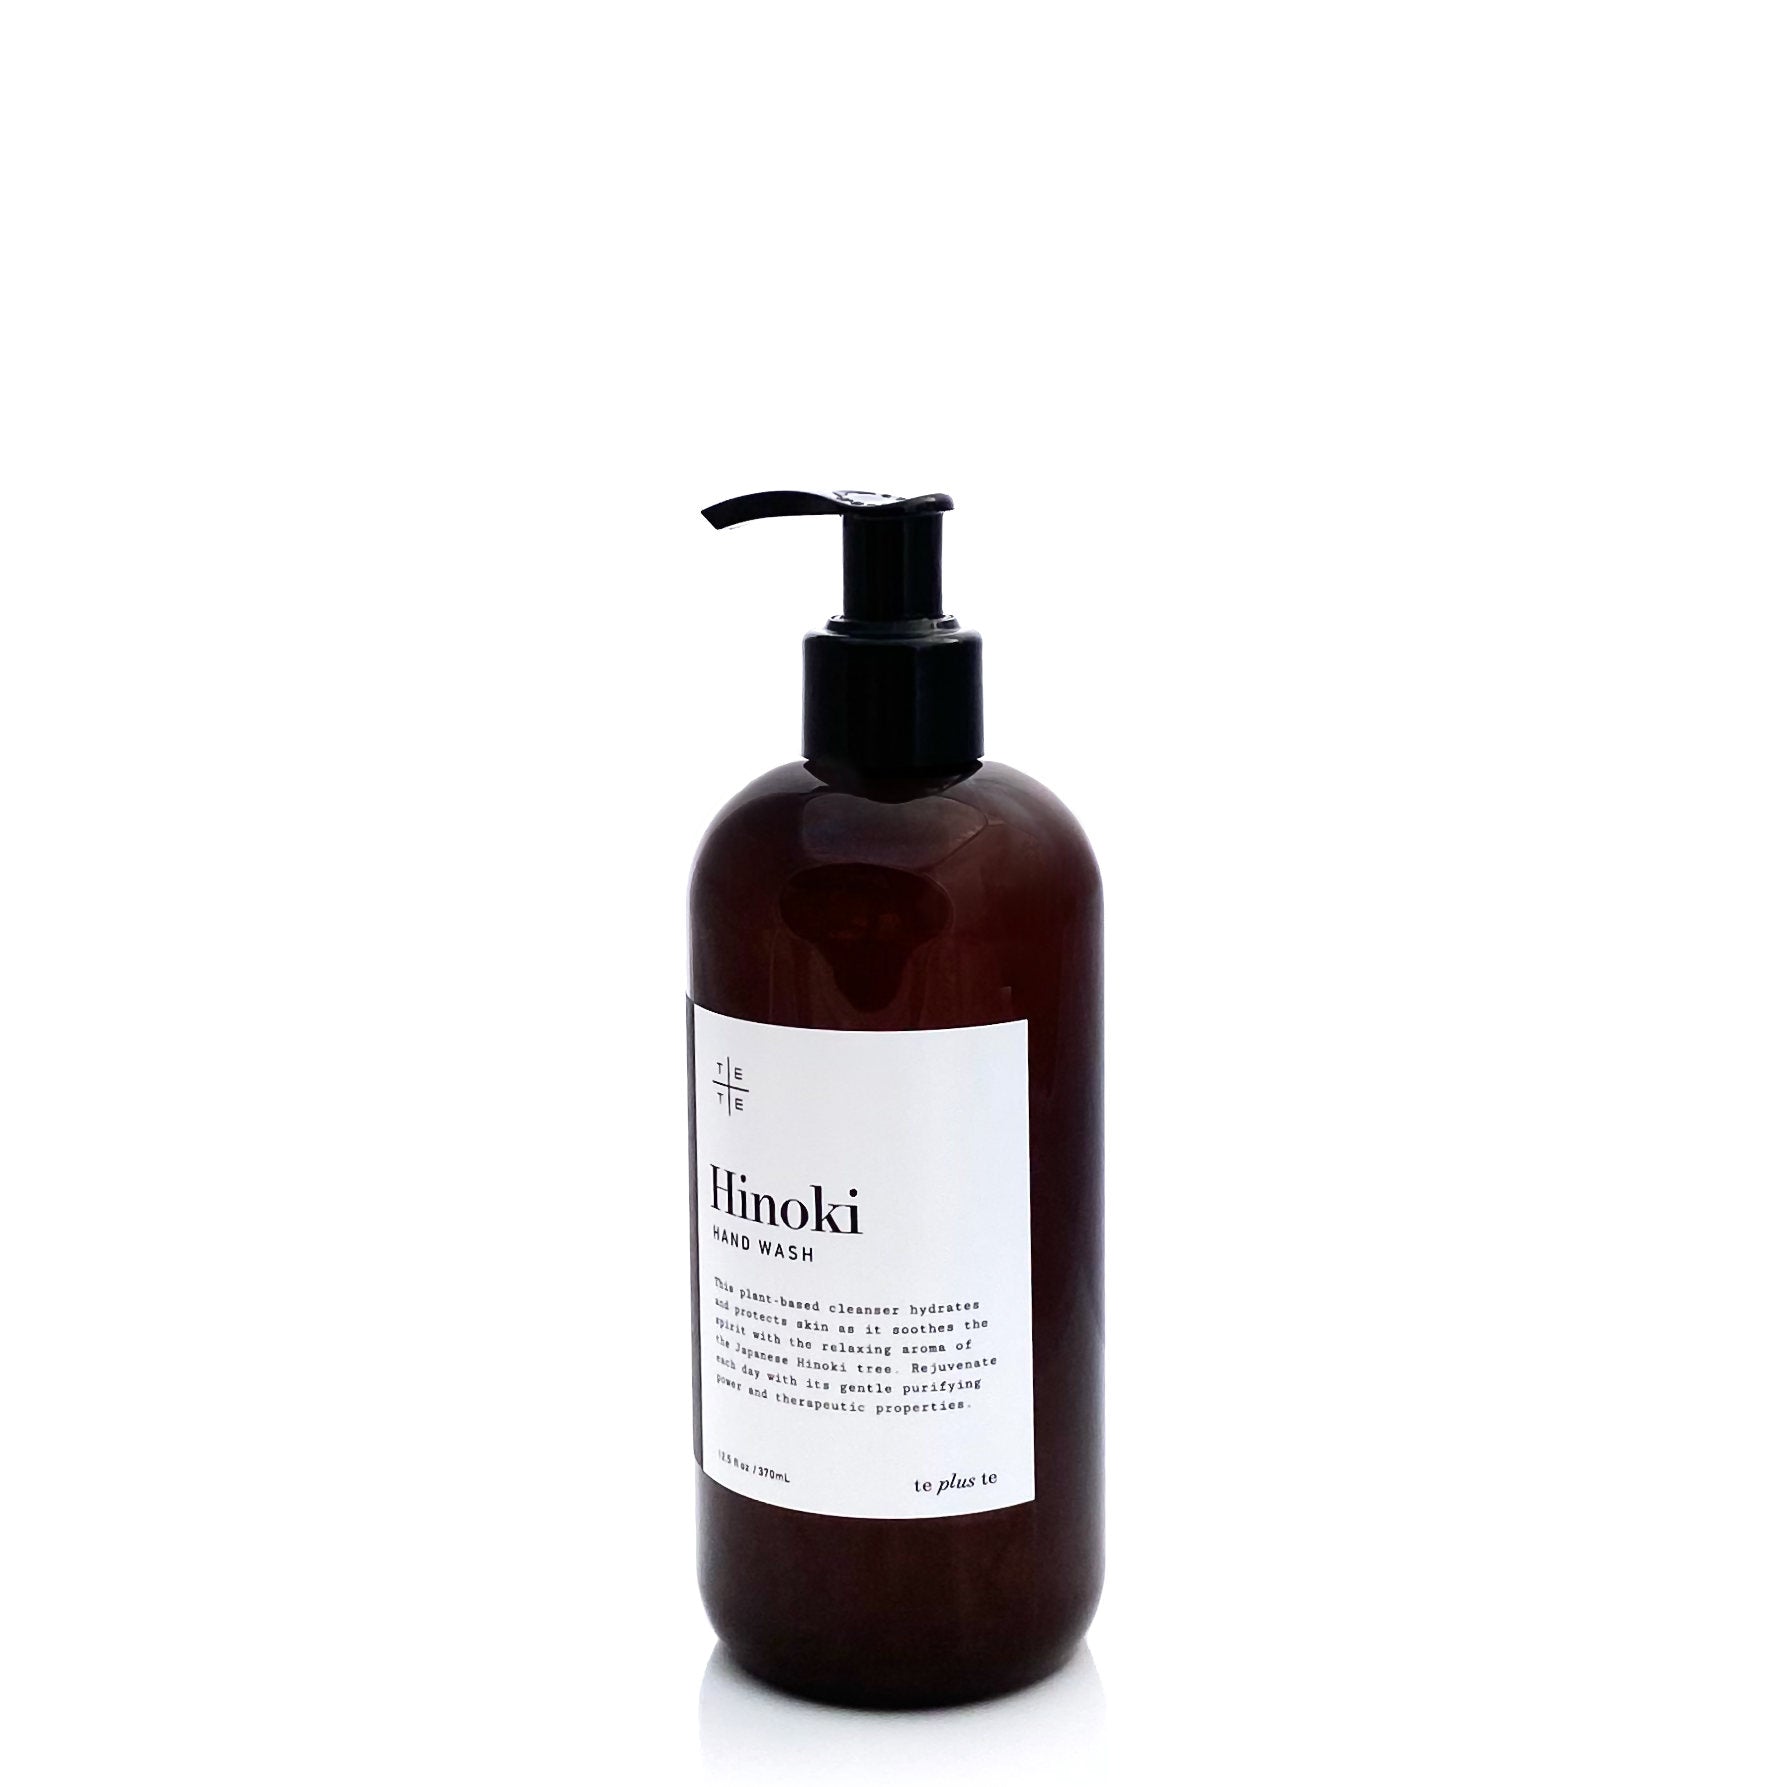 Hinoki Hand Wash - Te Plus Te. Hand washing ritual. Its gentle purifying power and deep therapeutic properties. The organic plant-based cleanser heals, hydrates and protects skin as it soothes the spirit with the relaxing aroma of the Japanese hinoki tree. 